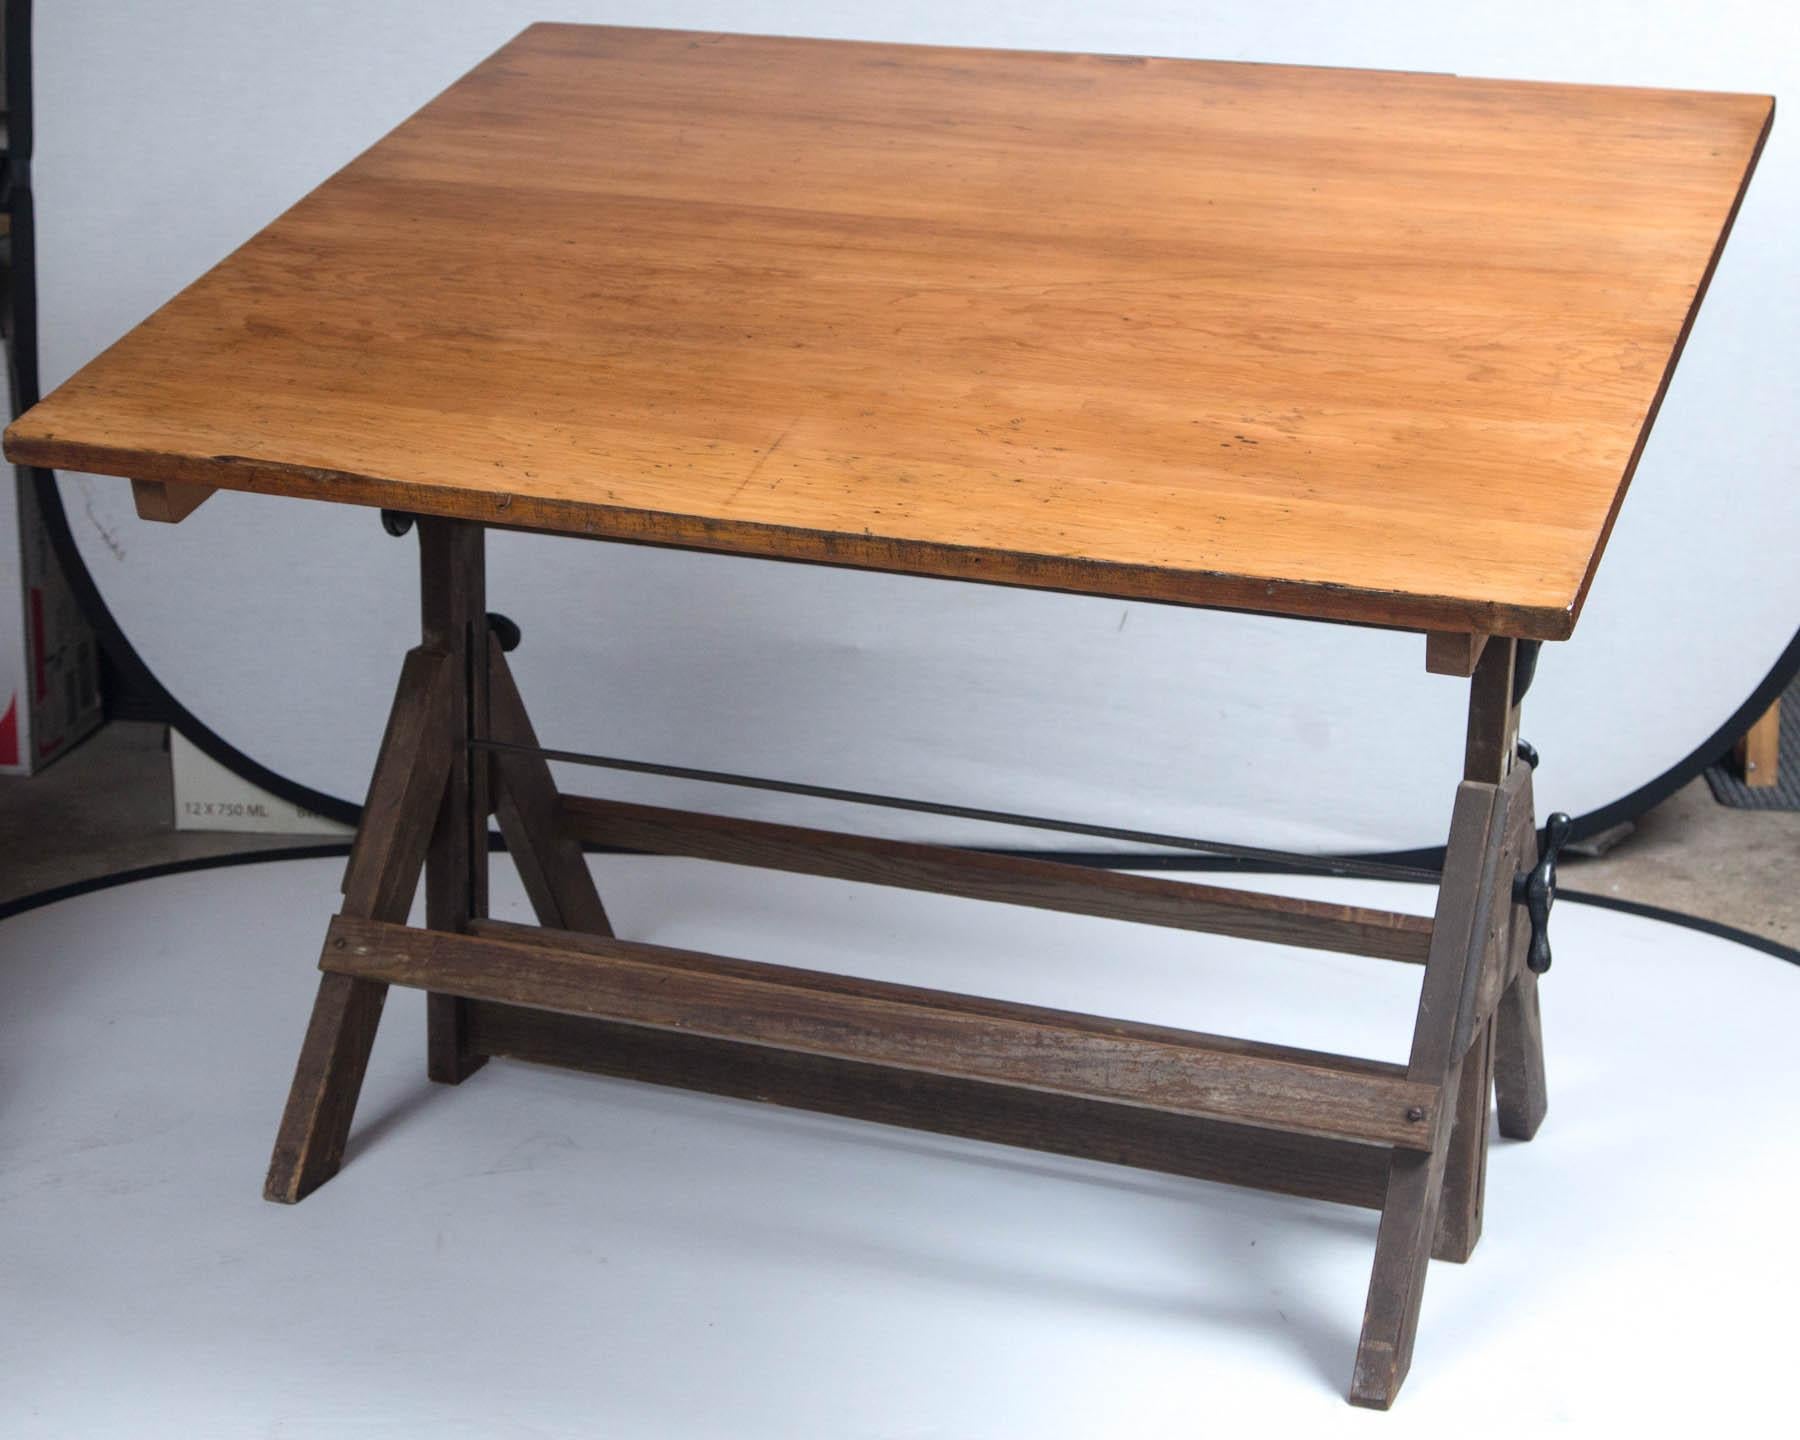 Vintage drafting table by Hamilton, circa 1940. Oak base with pine work surface, cast iron hardware. Tabletop height can be raised and positioned at varying angles. 
 